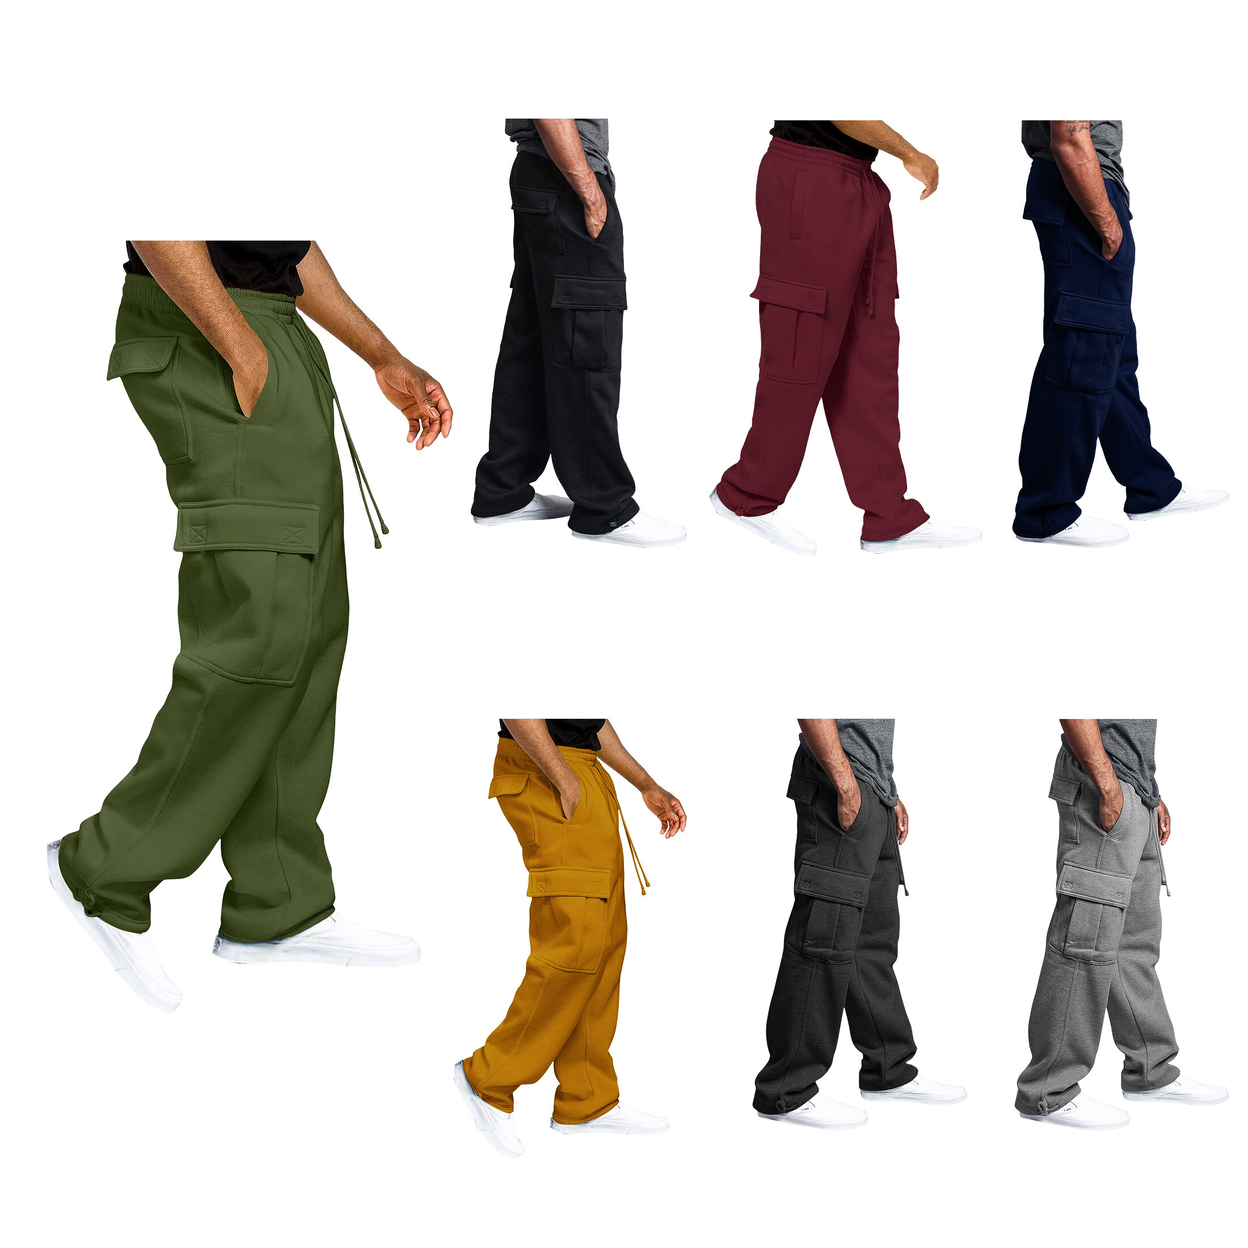 Men's Soft Casual Solid Fleece Lined Cargo Jogger Sweatpants With Pockets - Charcoal, X-large